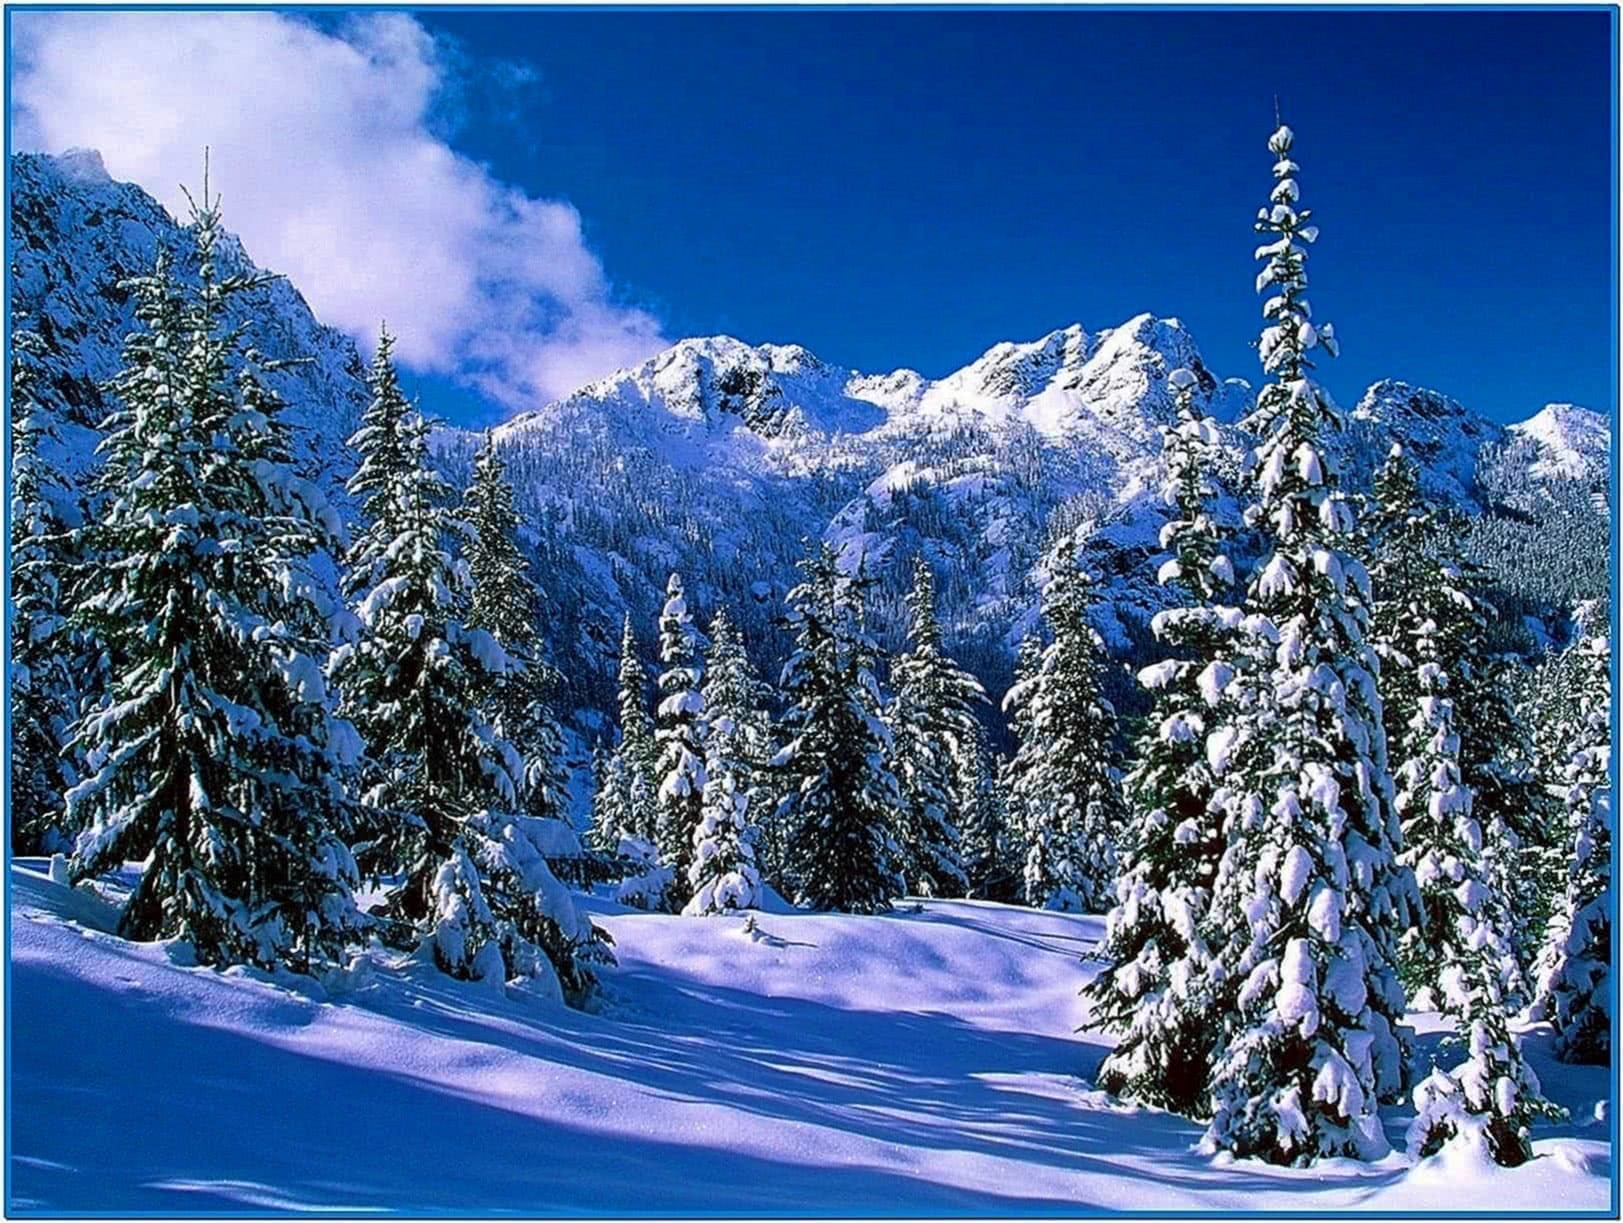 Winter screensaver images - Download free